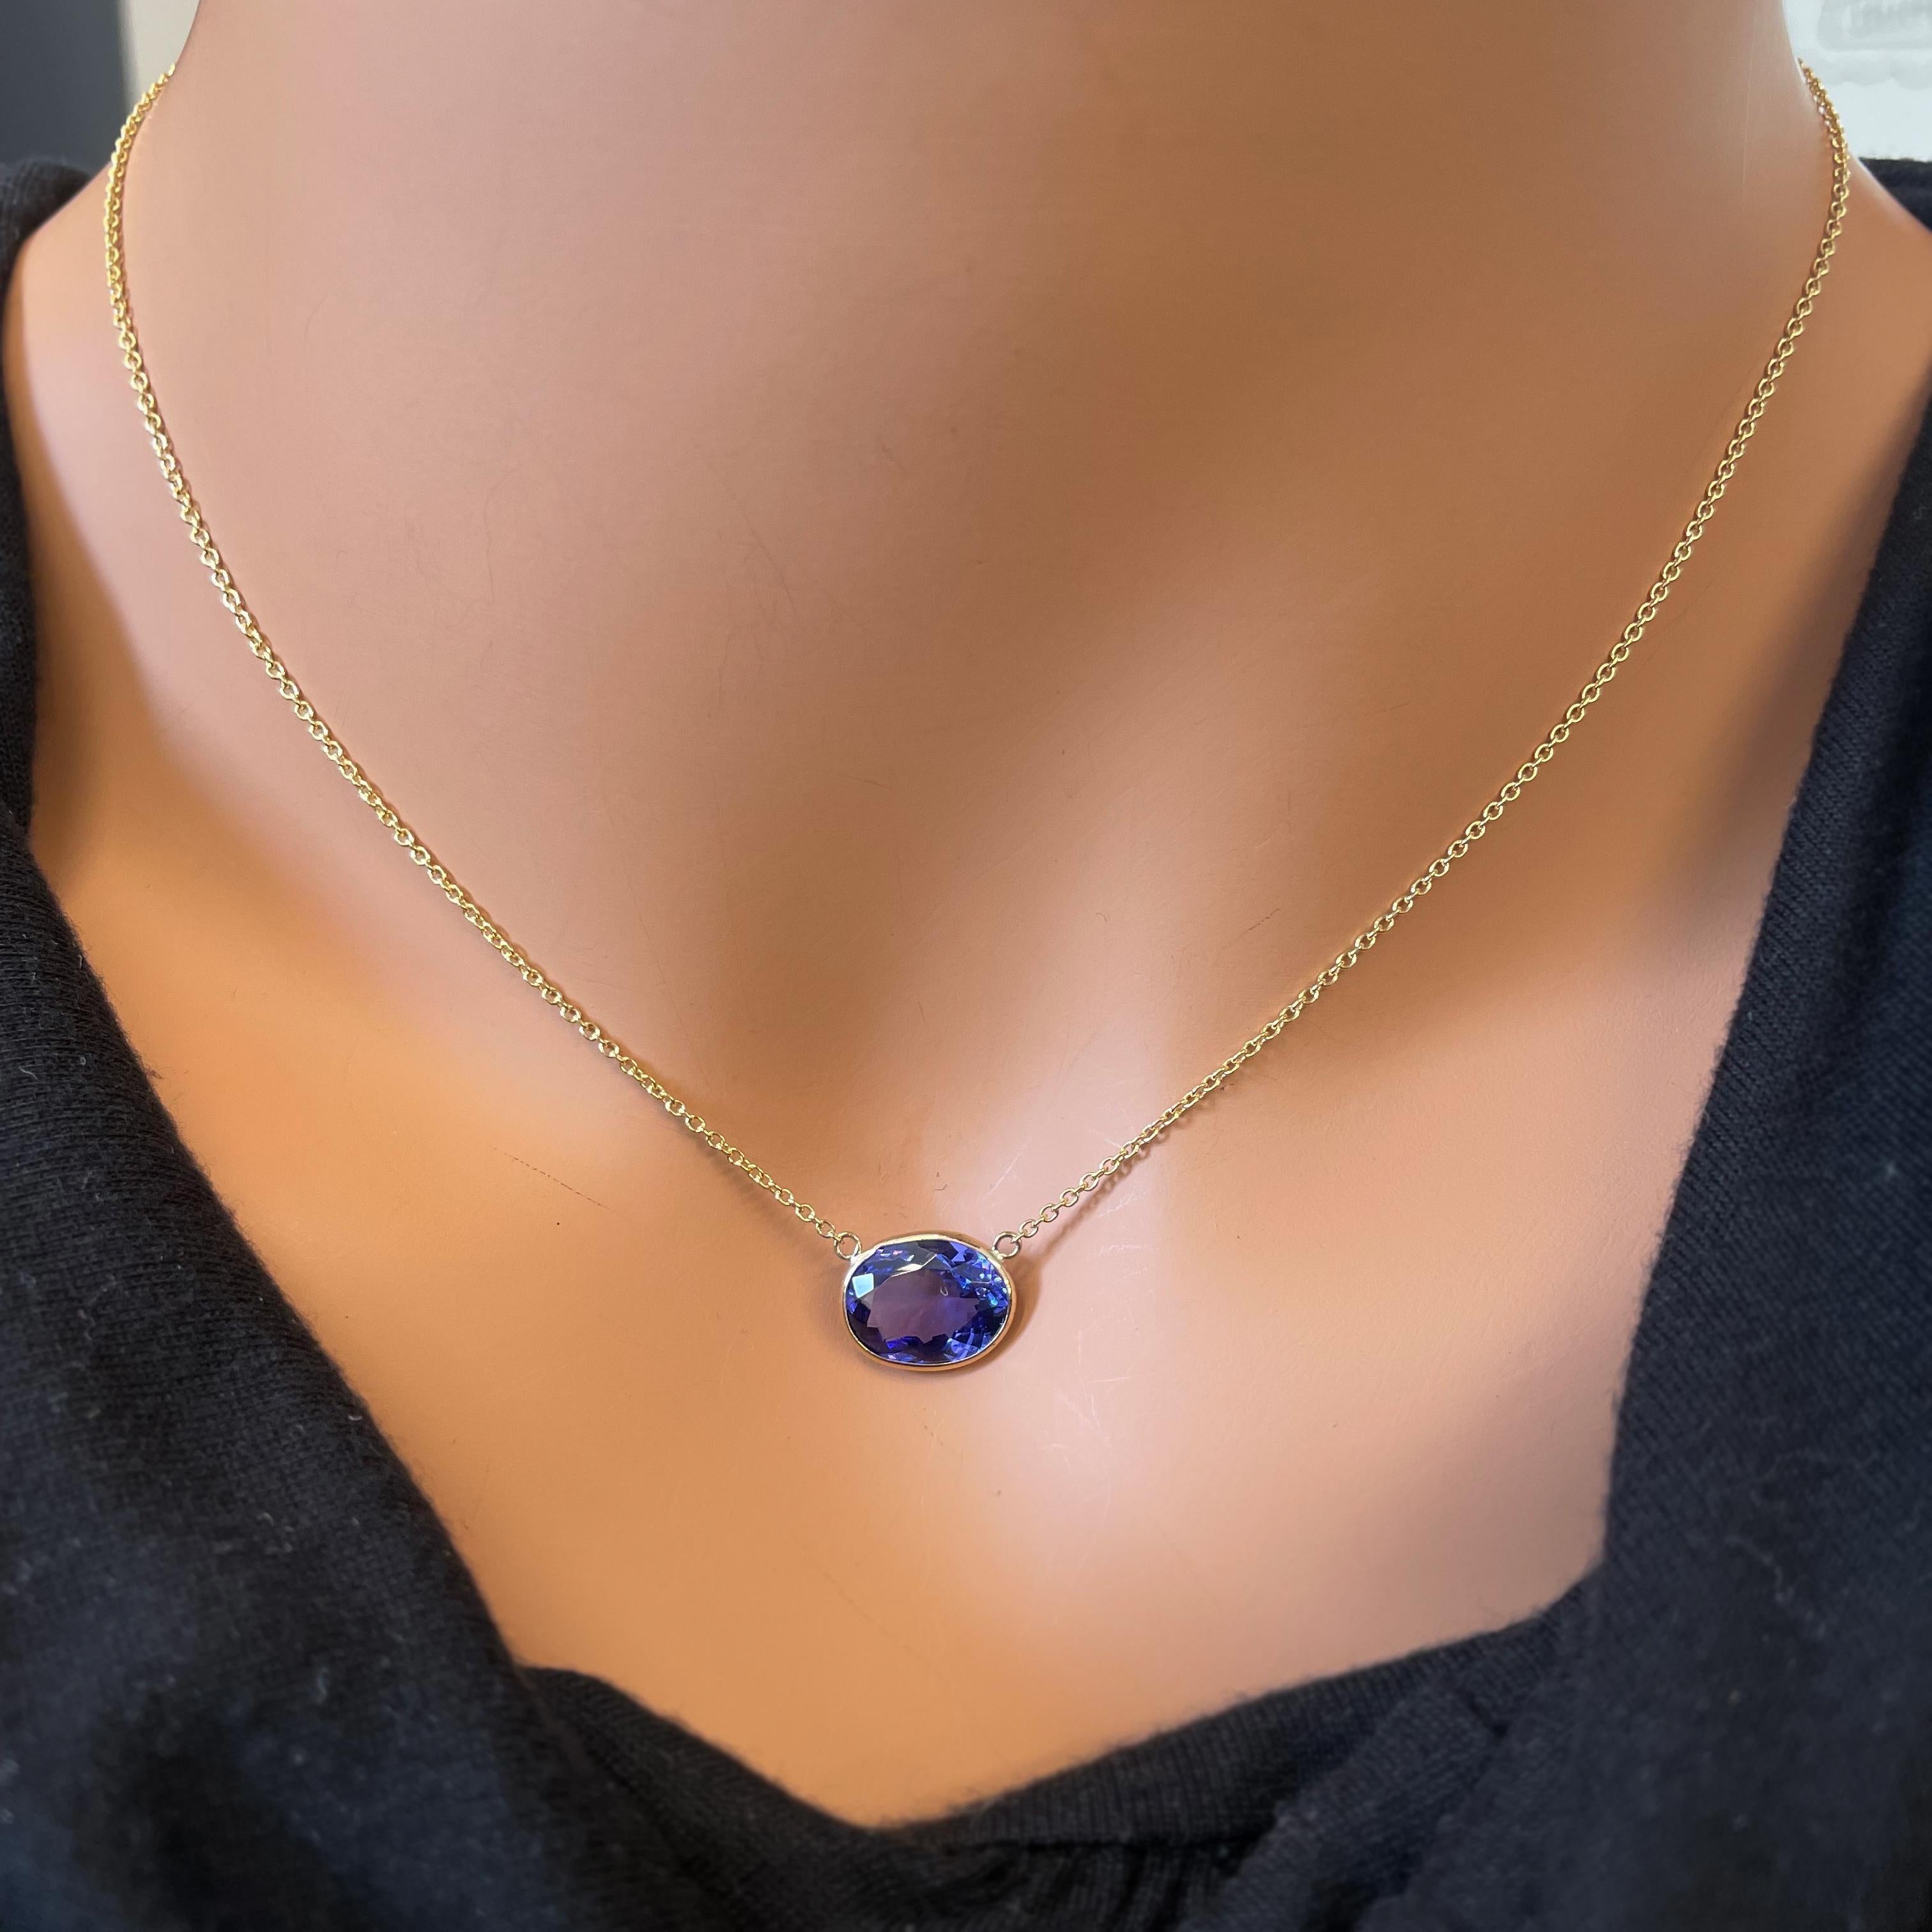 This necklace features an oval-cut Tanzanite with a weight of 3.77 carats, set in 14k yellow gold (YG). Tanzanite is a striking blue-violet gemstone known for its vivid color and allure. Oval cuts are also a popular choice for gemstones, as they